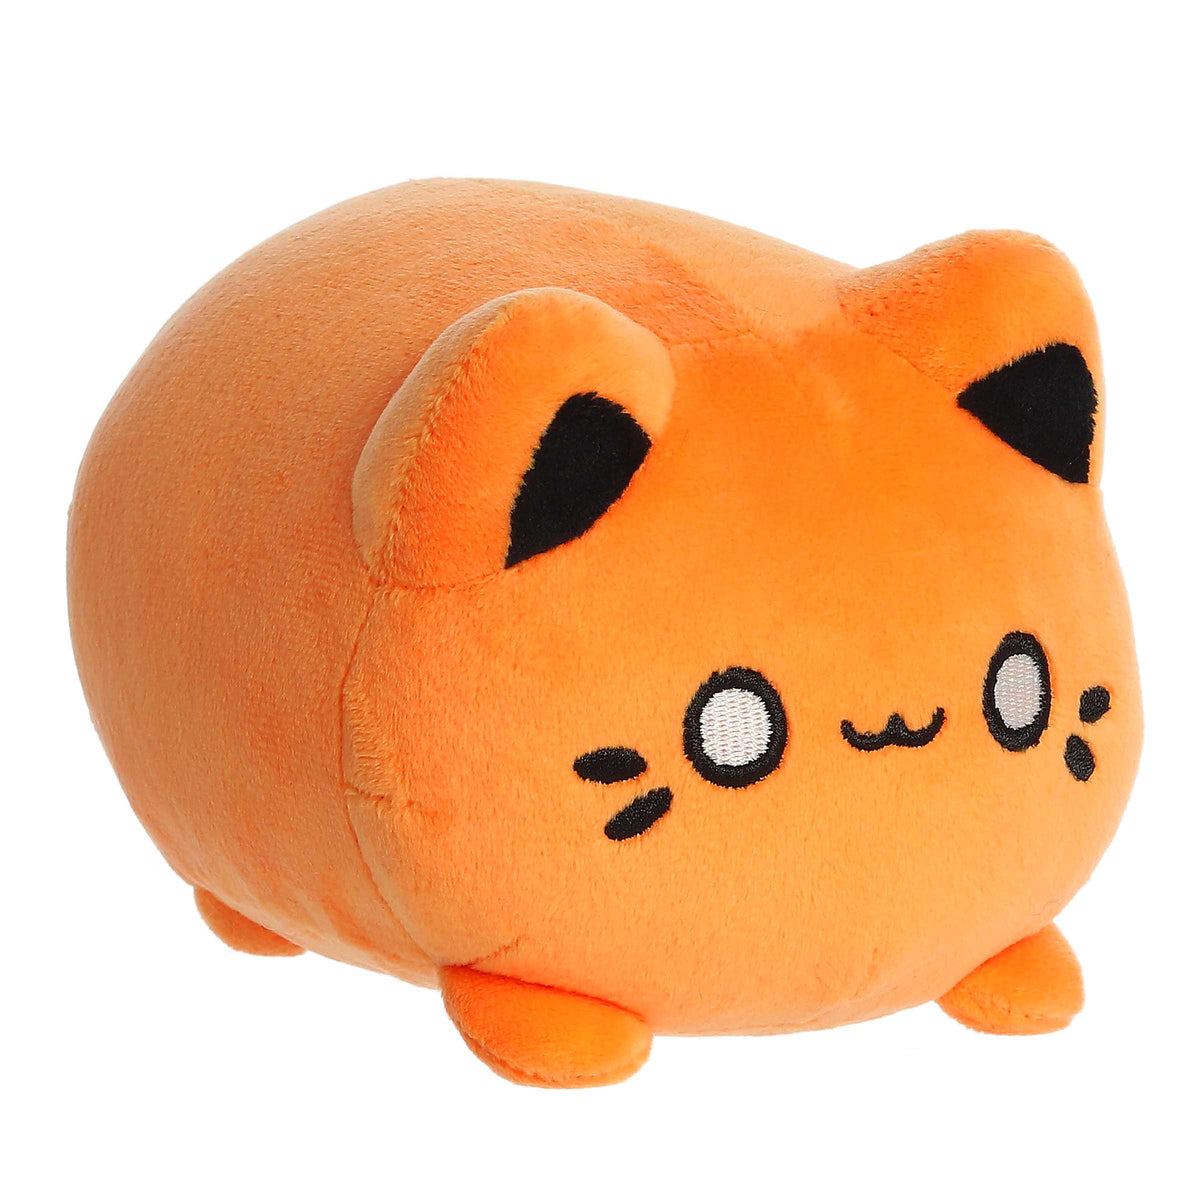 Cheery orange Meowchi plush by Tasty Peach with a happy face, ready for ultimate fluffy kitty cat plush cuddles.